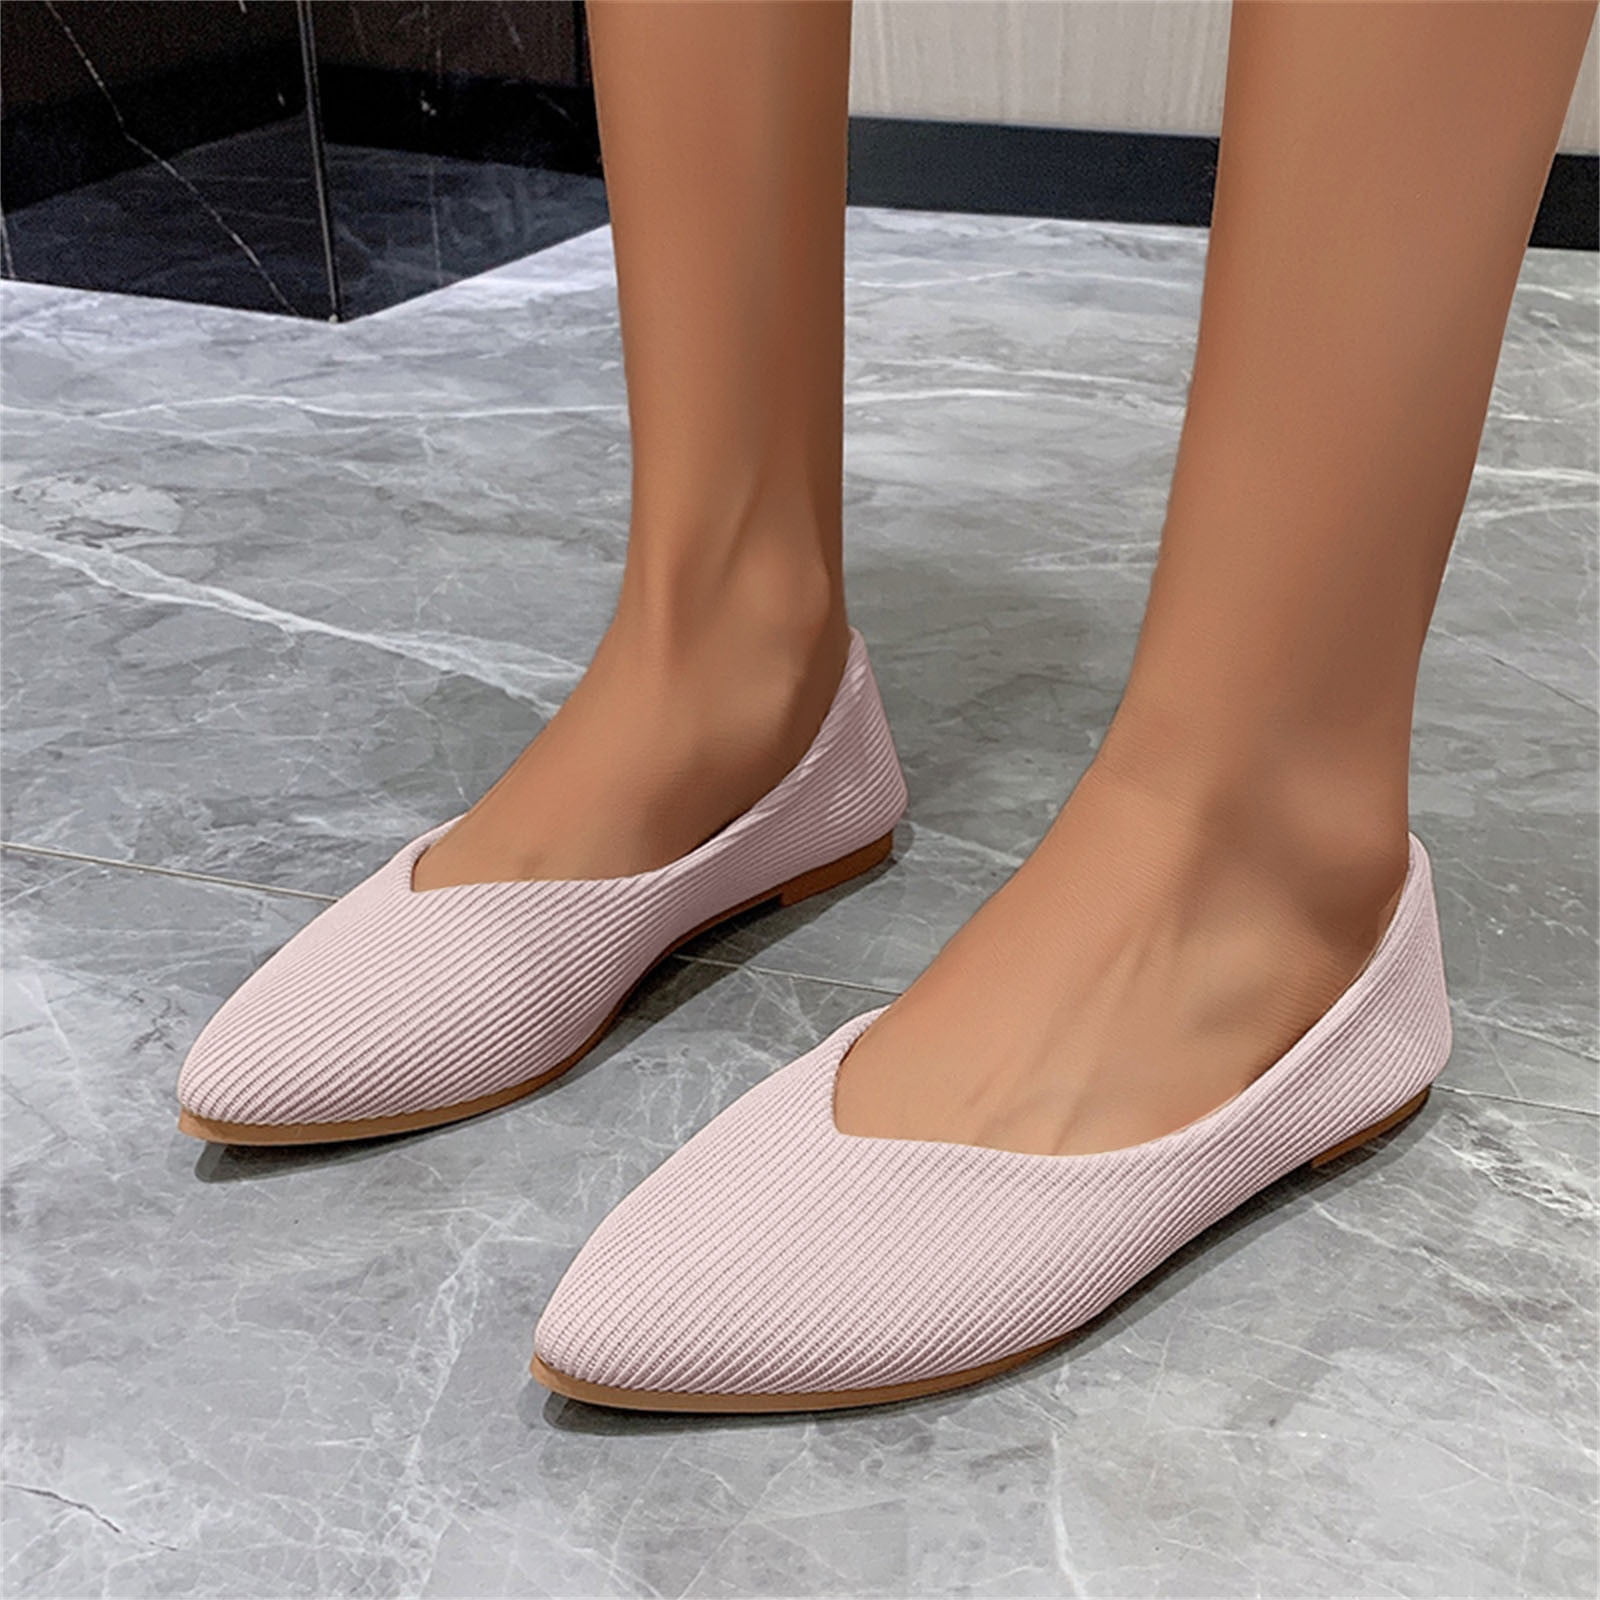 TOWED22 Flat Shoes For Women,Sandals Slip On Pumps Flat Pointed Toe Sparkle  Pearl Cute Fashion Casual Summer Wedge Sandalias,Beige 